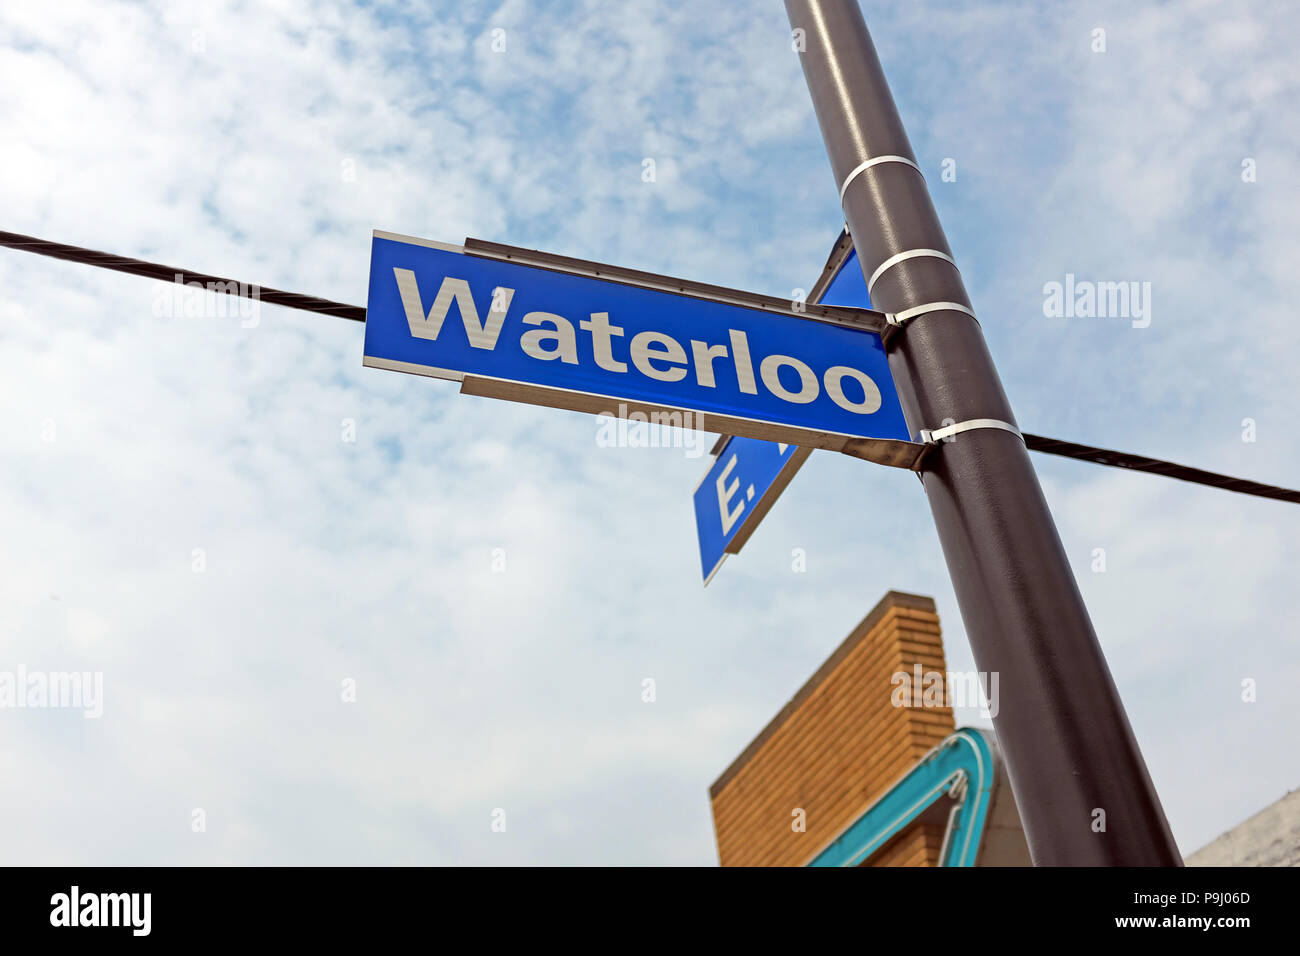 The Waterloo Arts and Entertainment District in Cleveland, Ohio, USA is known for its independent shops, arts, and music scene. Stock Photo